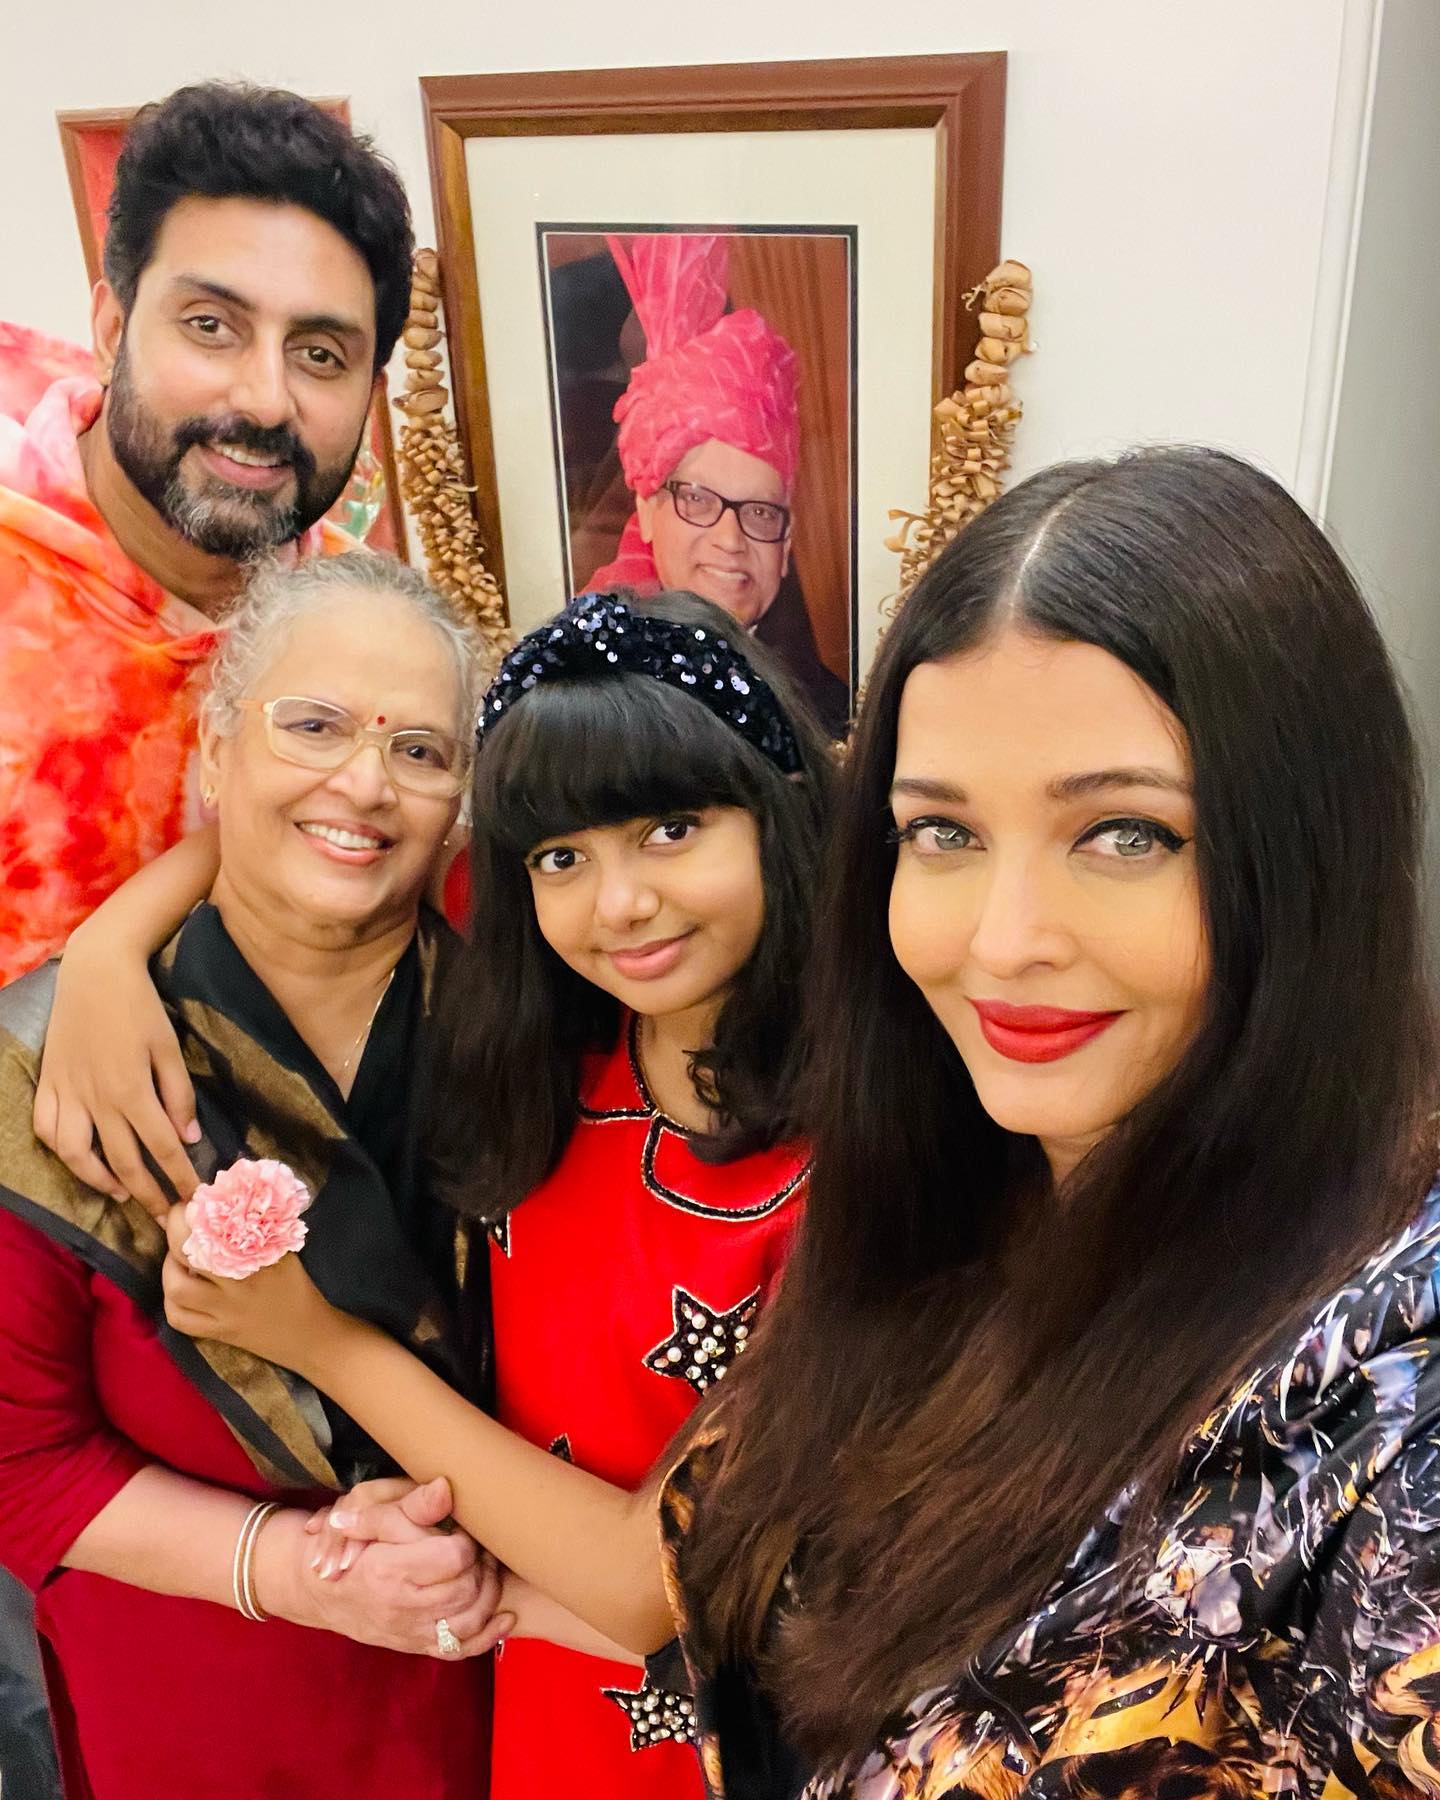 283144478 335657852028177 5314642883544770712 n Aishwarya Rai celebrated her mother Vrinda's birthday in a very special way, showed a special glimpse of three generations in a single frame